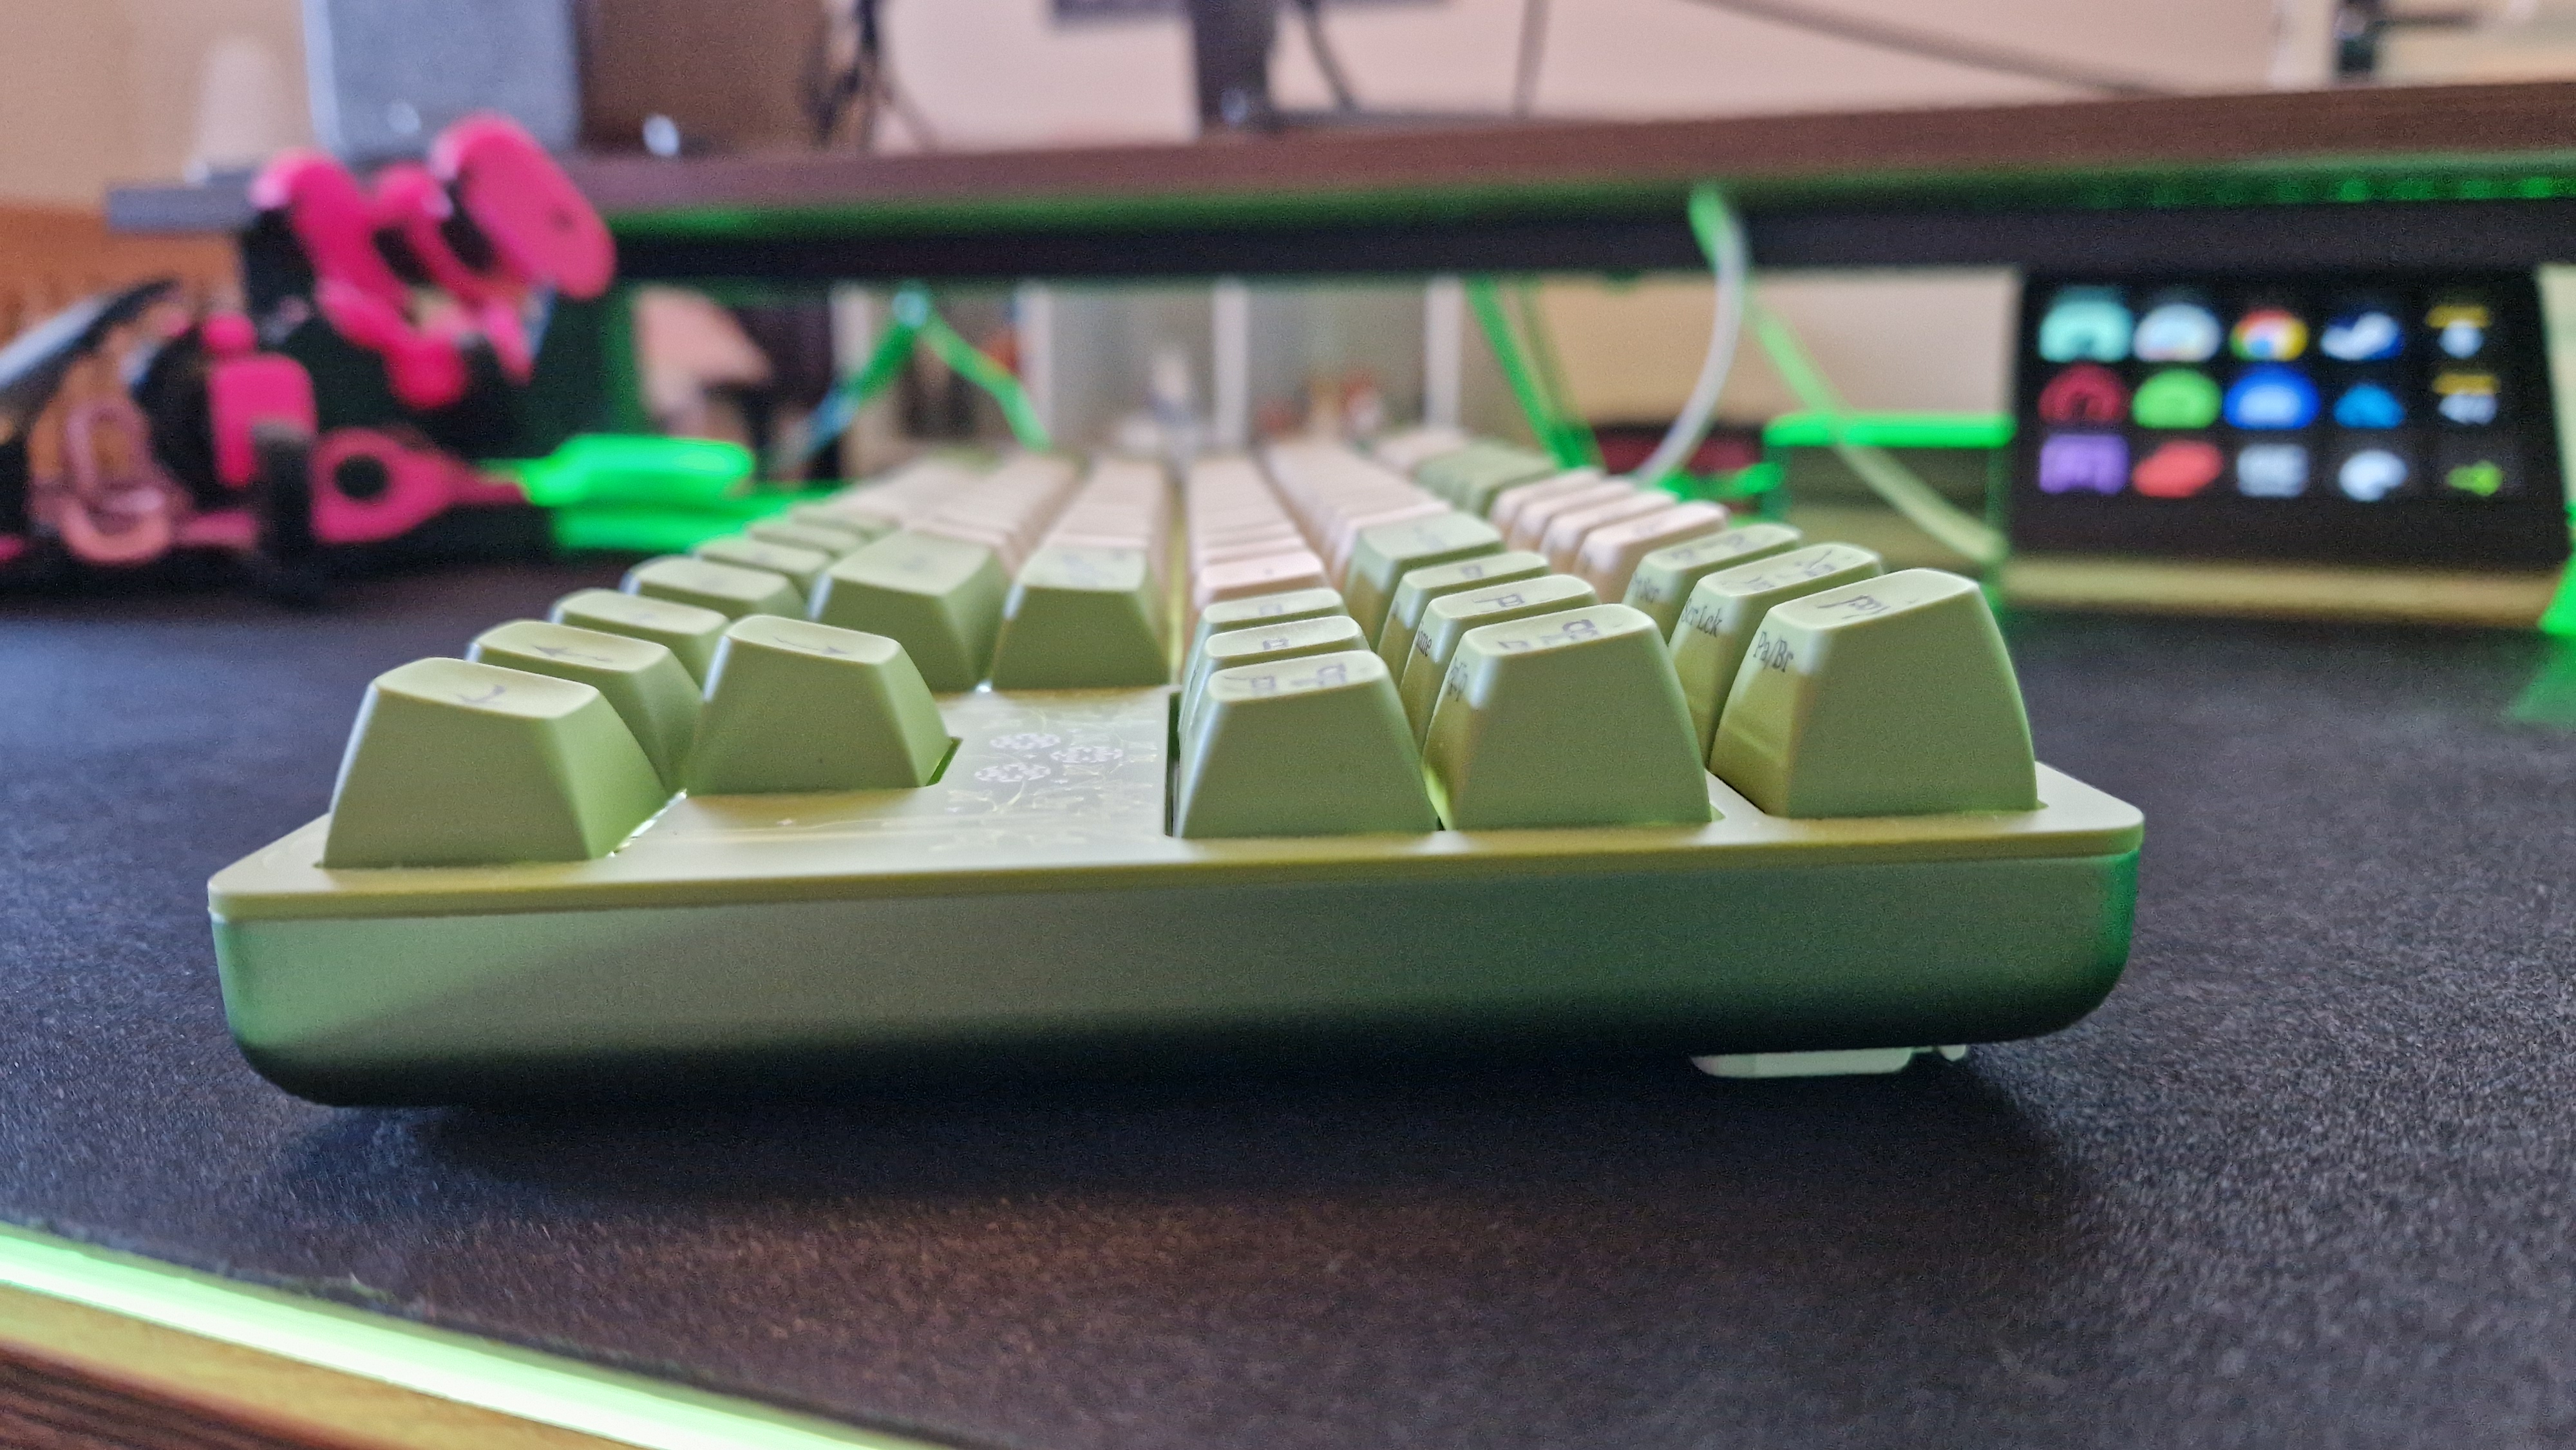 Drop + LOTR Elvish Keyboard image from the side, showing the keyboard's curves and ergonomics